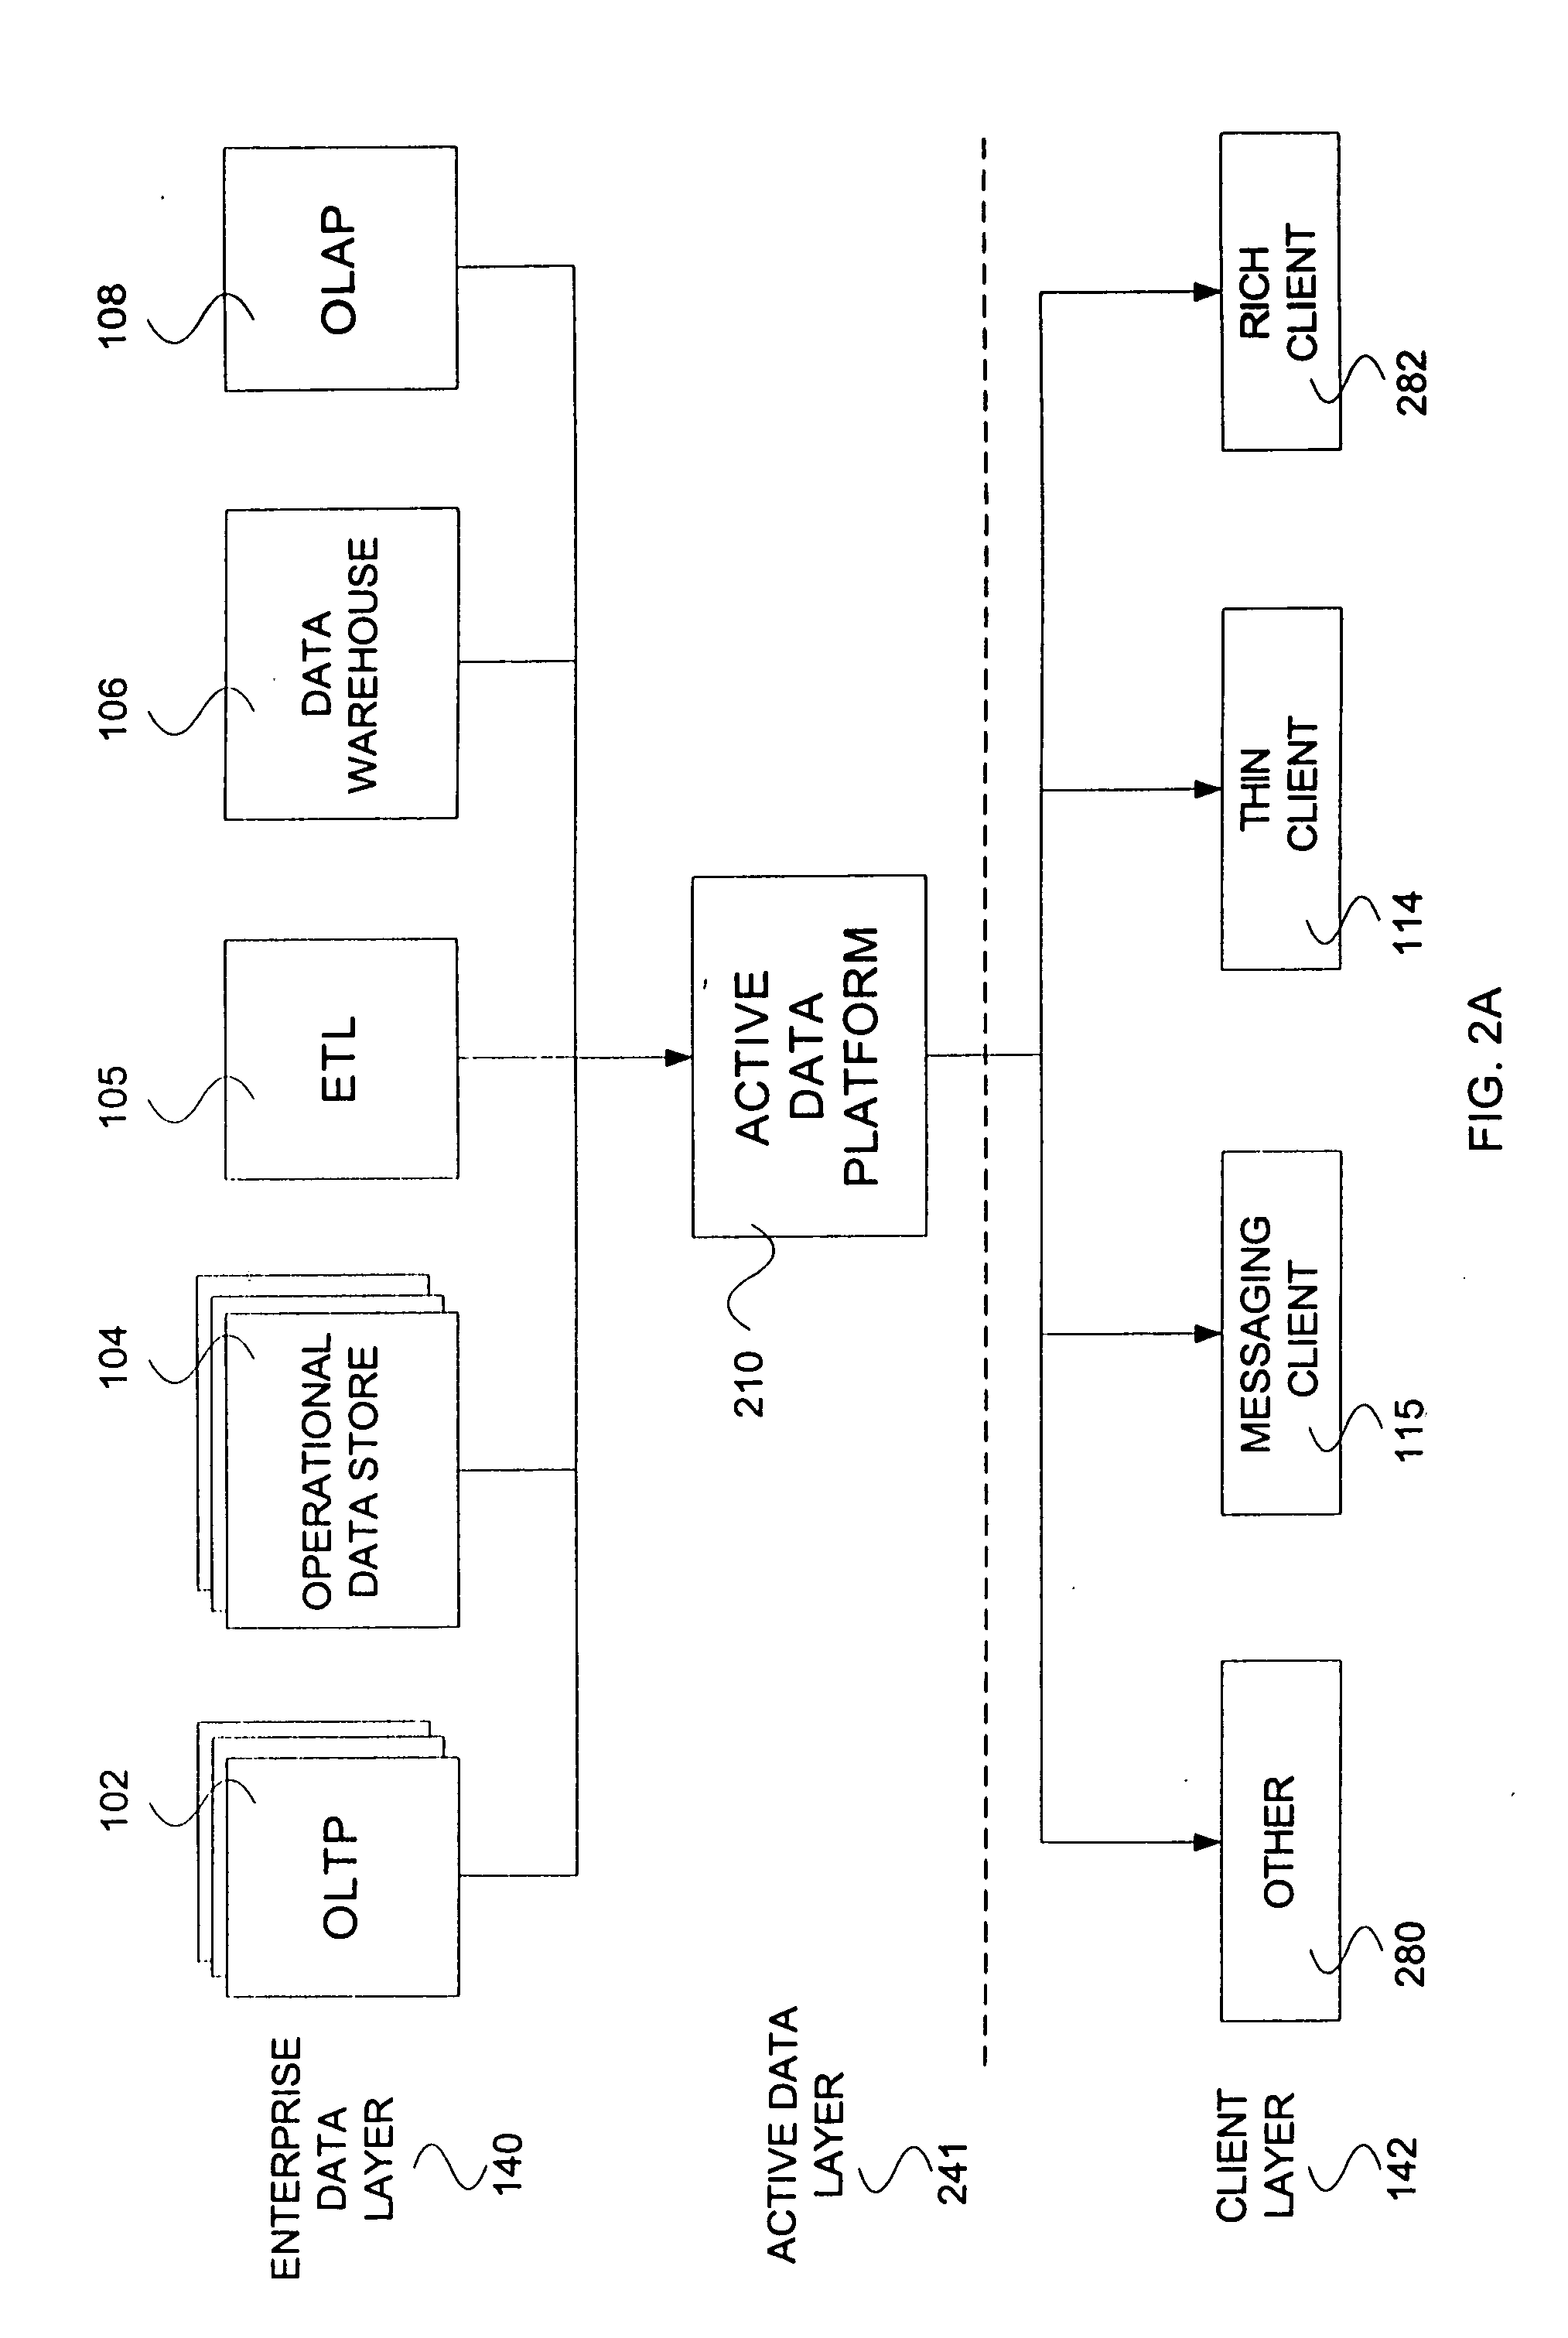 Method and apparatus for a multiplexed active data window in a near real-time business intelligence system